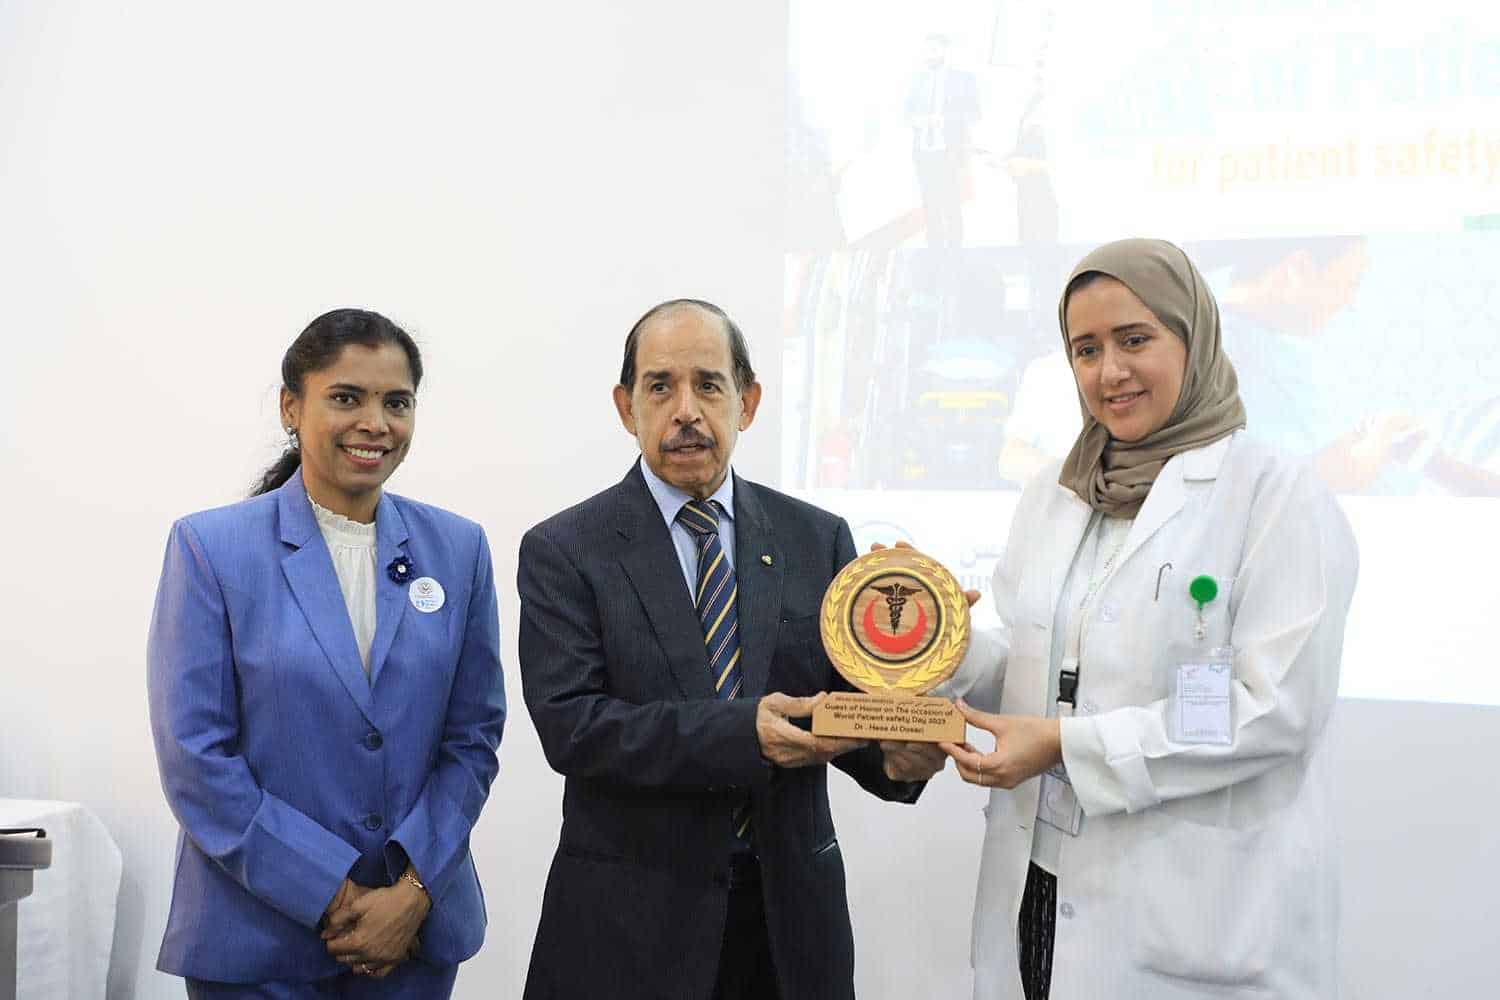 world patient safety day 2023 2 Ibn Al-Nafees Hospital,Private Hospital in Bahrain,Best Private Hospital in Bahrain,Hospitals in Bahrain,Hospitals in Manama,Hospitals in Manama Bahrain,Private Hospitals in Bahrain